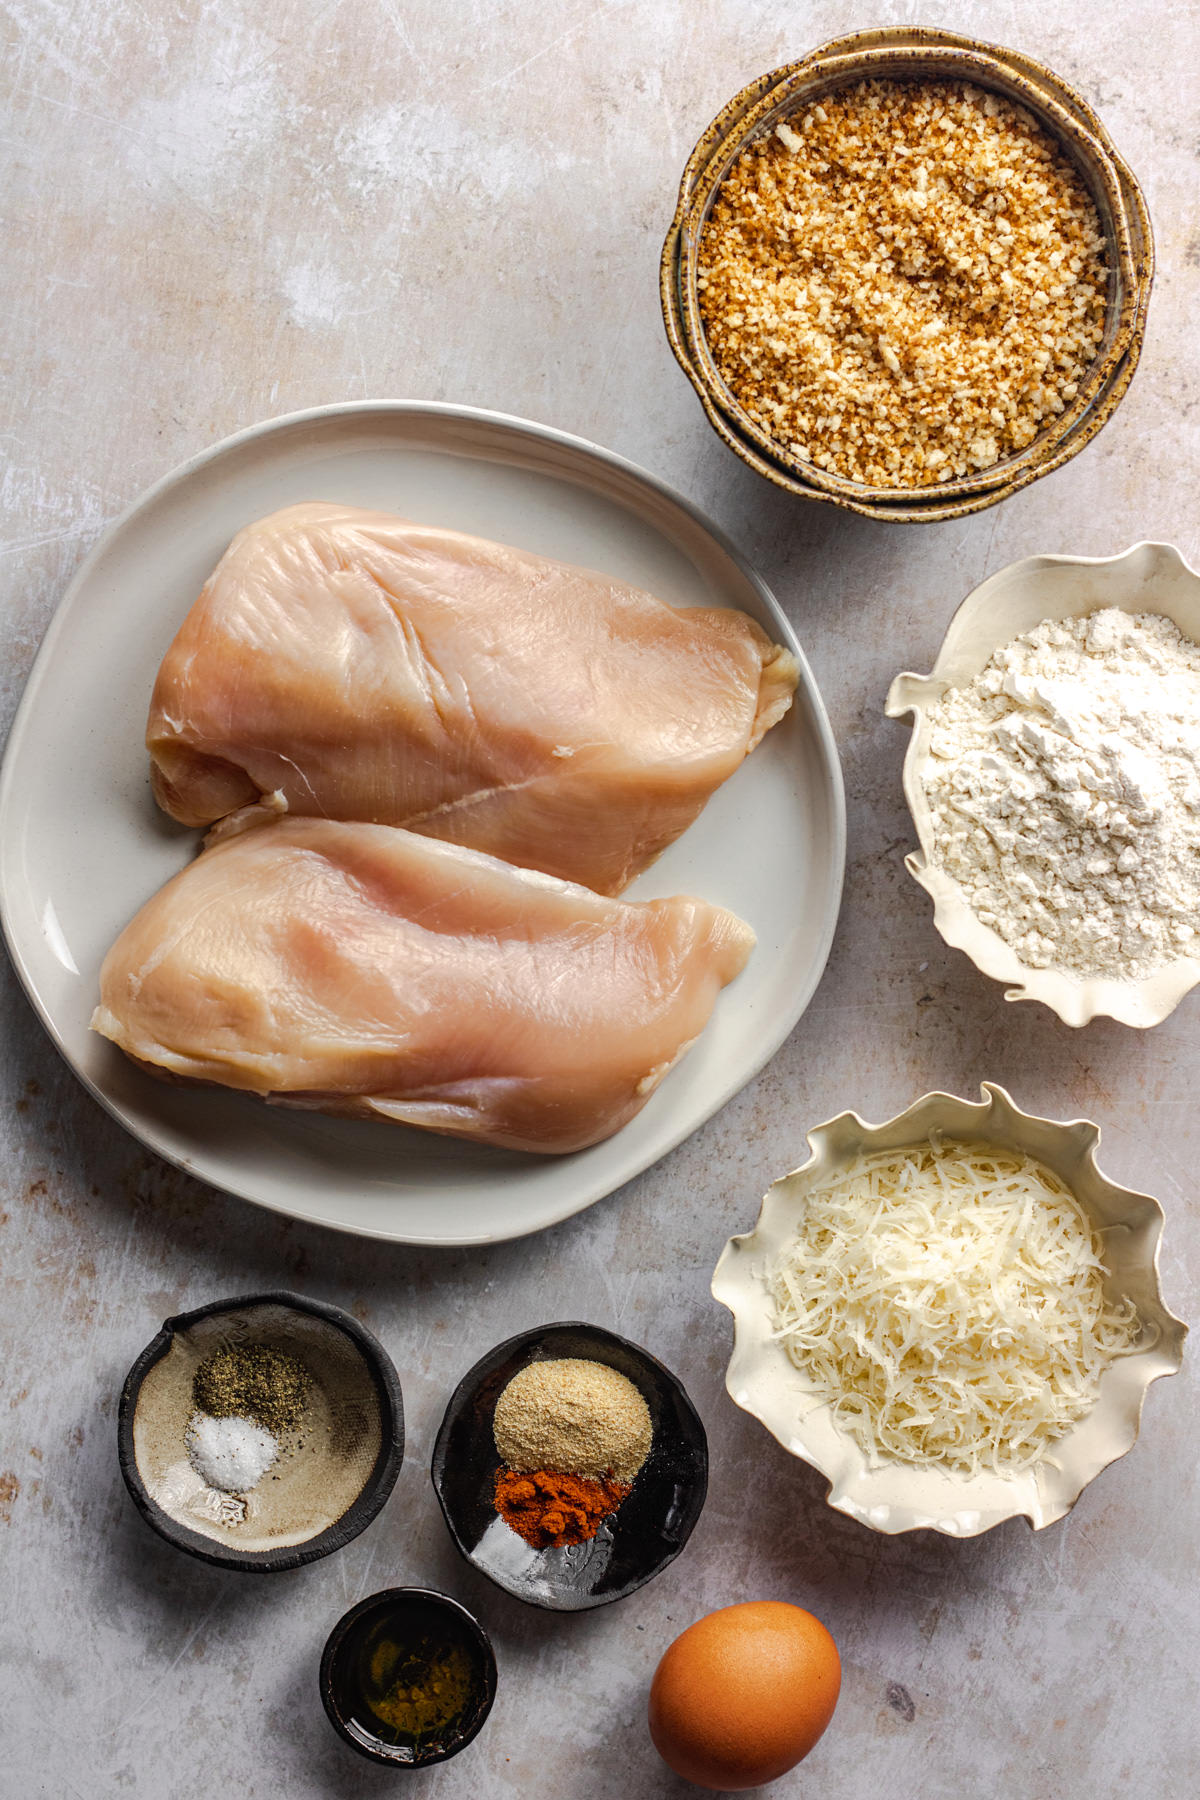 Ingredients for baked panko chicken